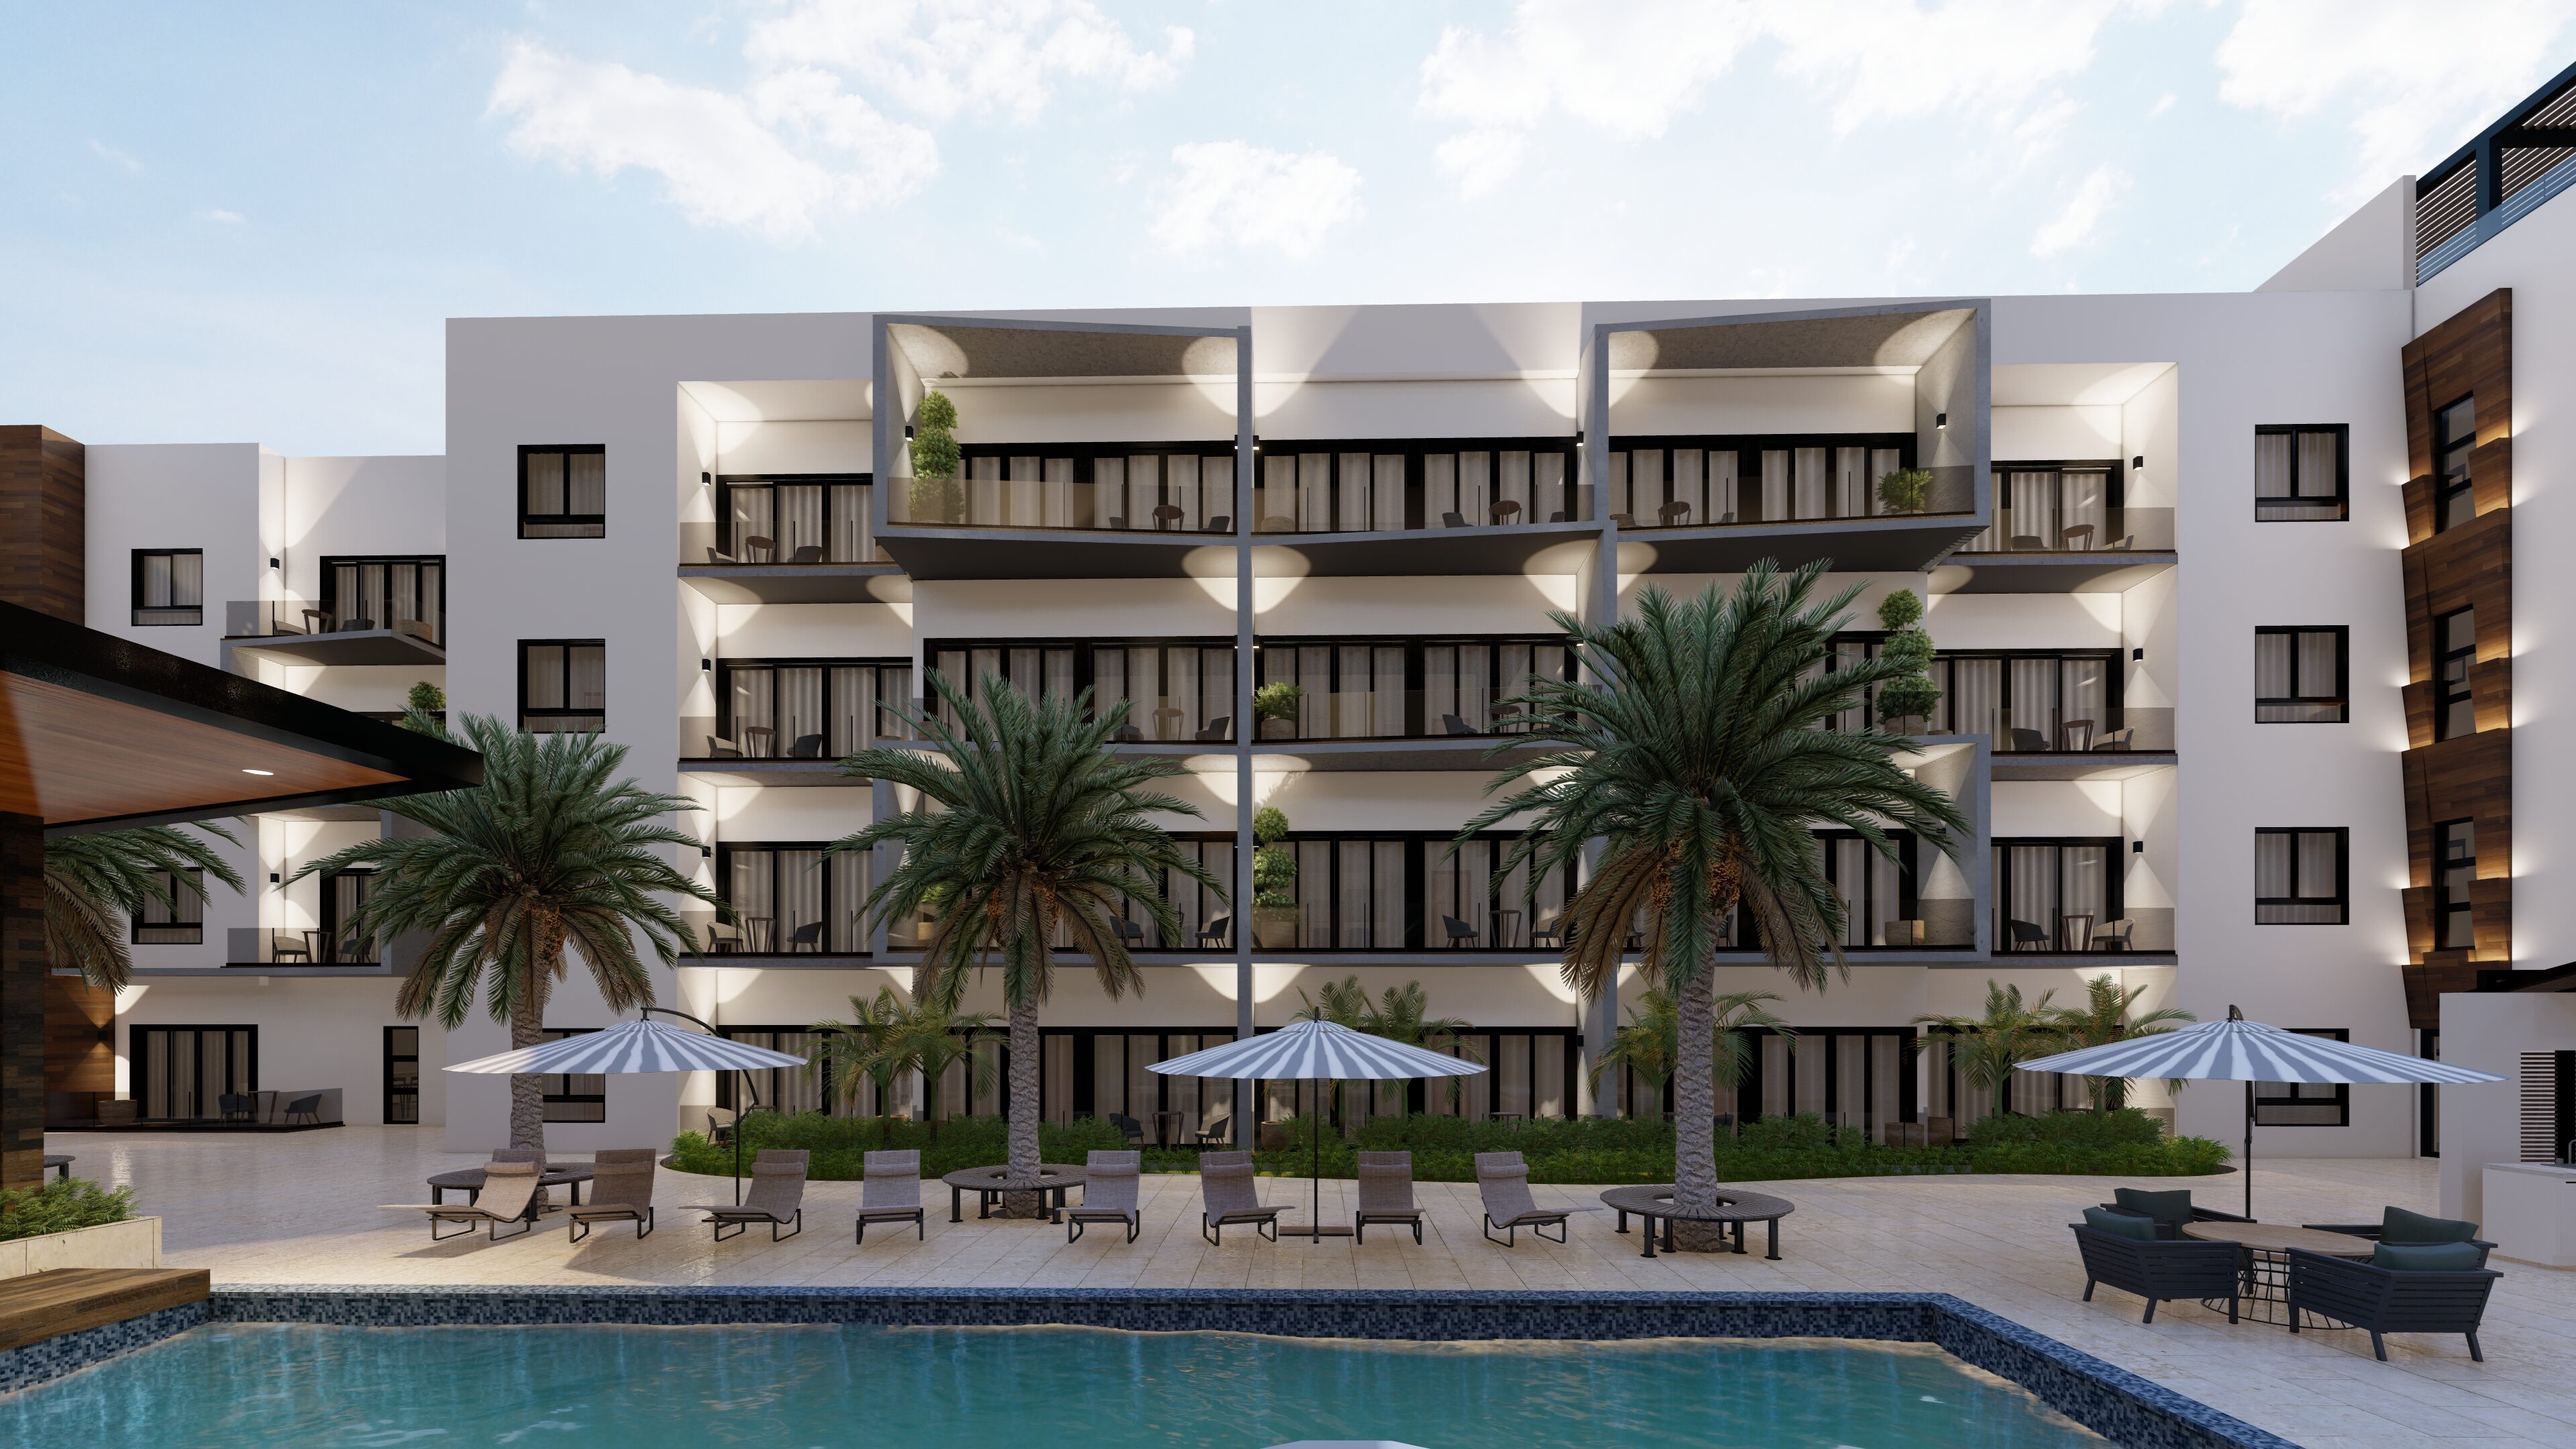 NEW APARTMENT FOR SALE|PUNTA CANA|DOWNTOWN PUNTA CANA